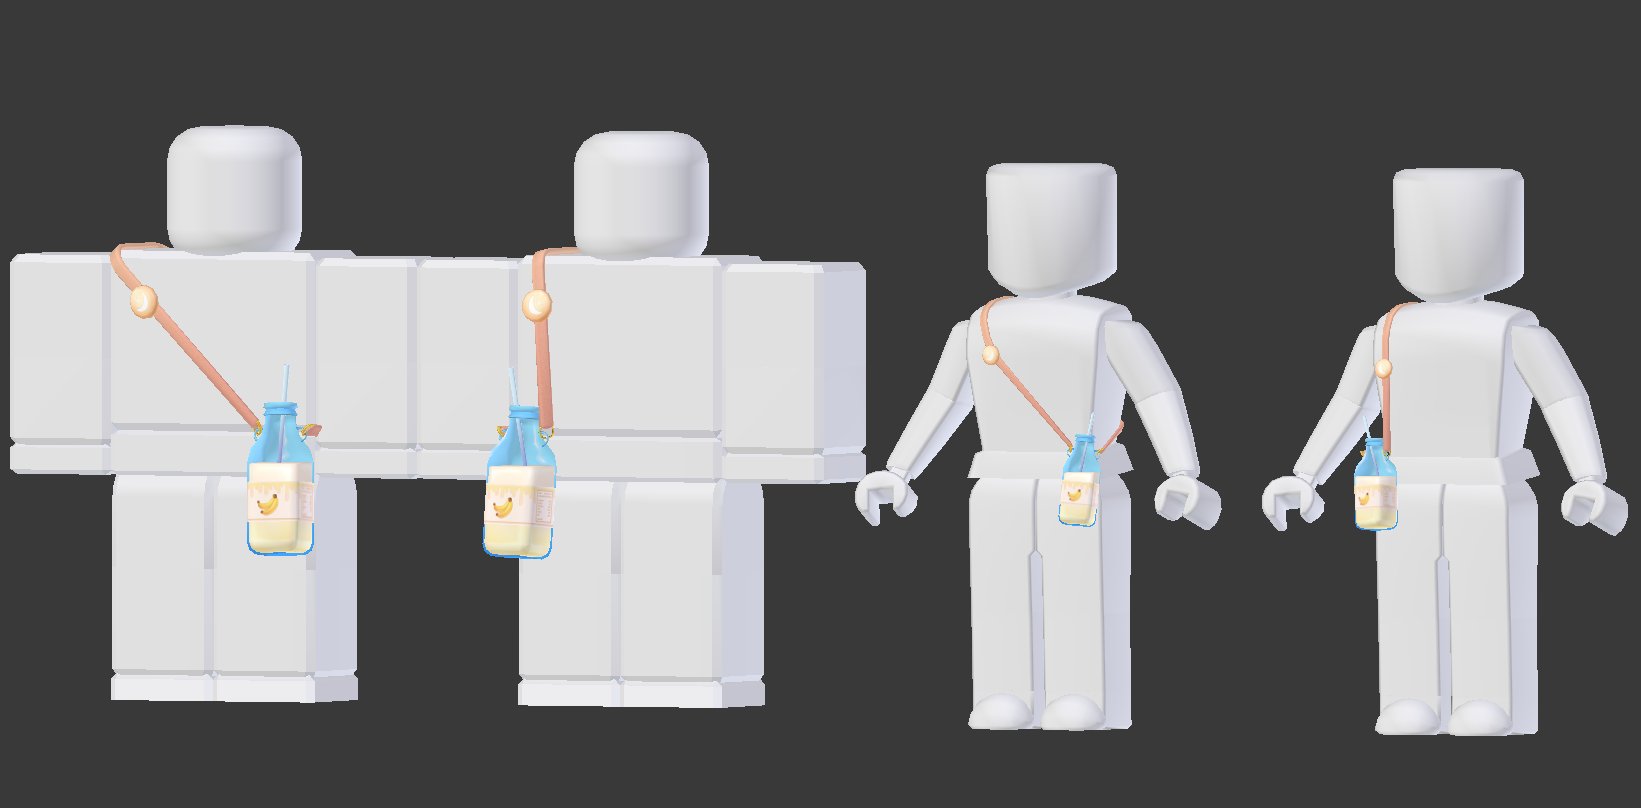 Vivian On Twitter T Minus 1 Hour And 30 Minutes Until New Years 0 So Excited For These Eeep Look At All Those Variations Robloxugc Gonna Play A Bit More With The Next One S Label Probably Cherry D Https T Co Nkeosyz1jb - robloxian 1.0